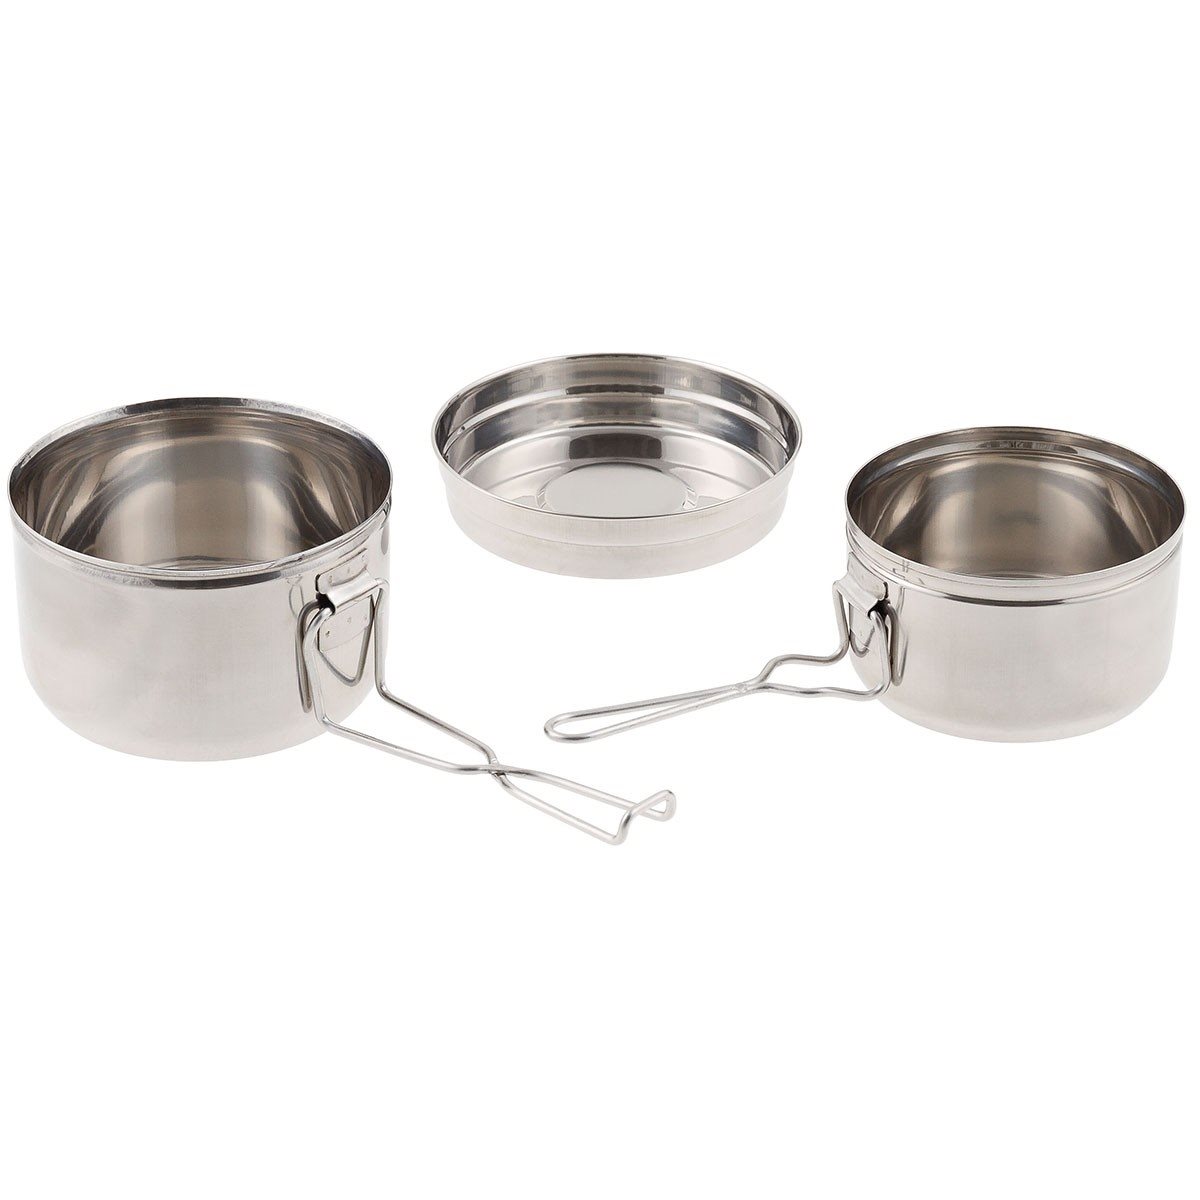 Mess Kit Stainless Steel 3 pieces STORE LINE ostatní 158019431 L-11